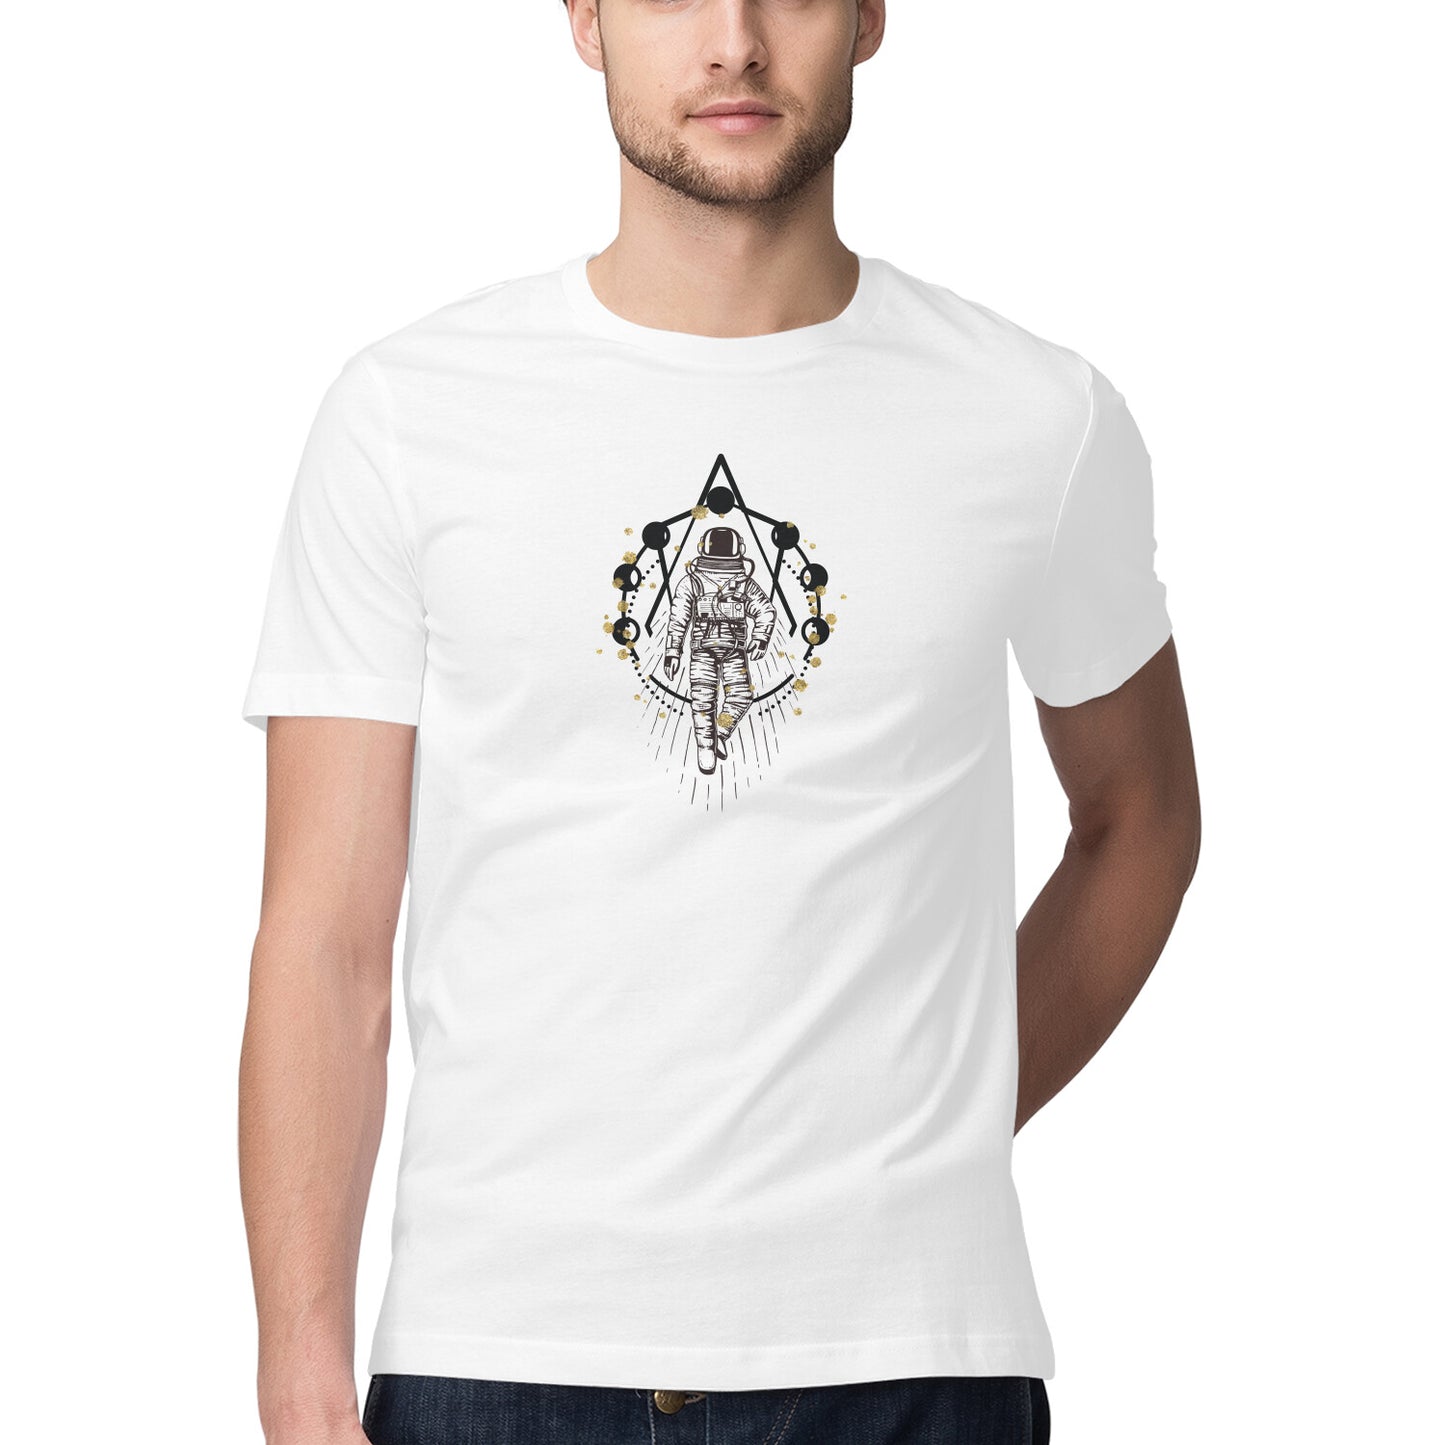 Space Art 17 Printed Graphic T-Shirt